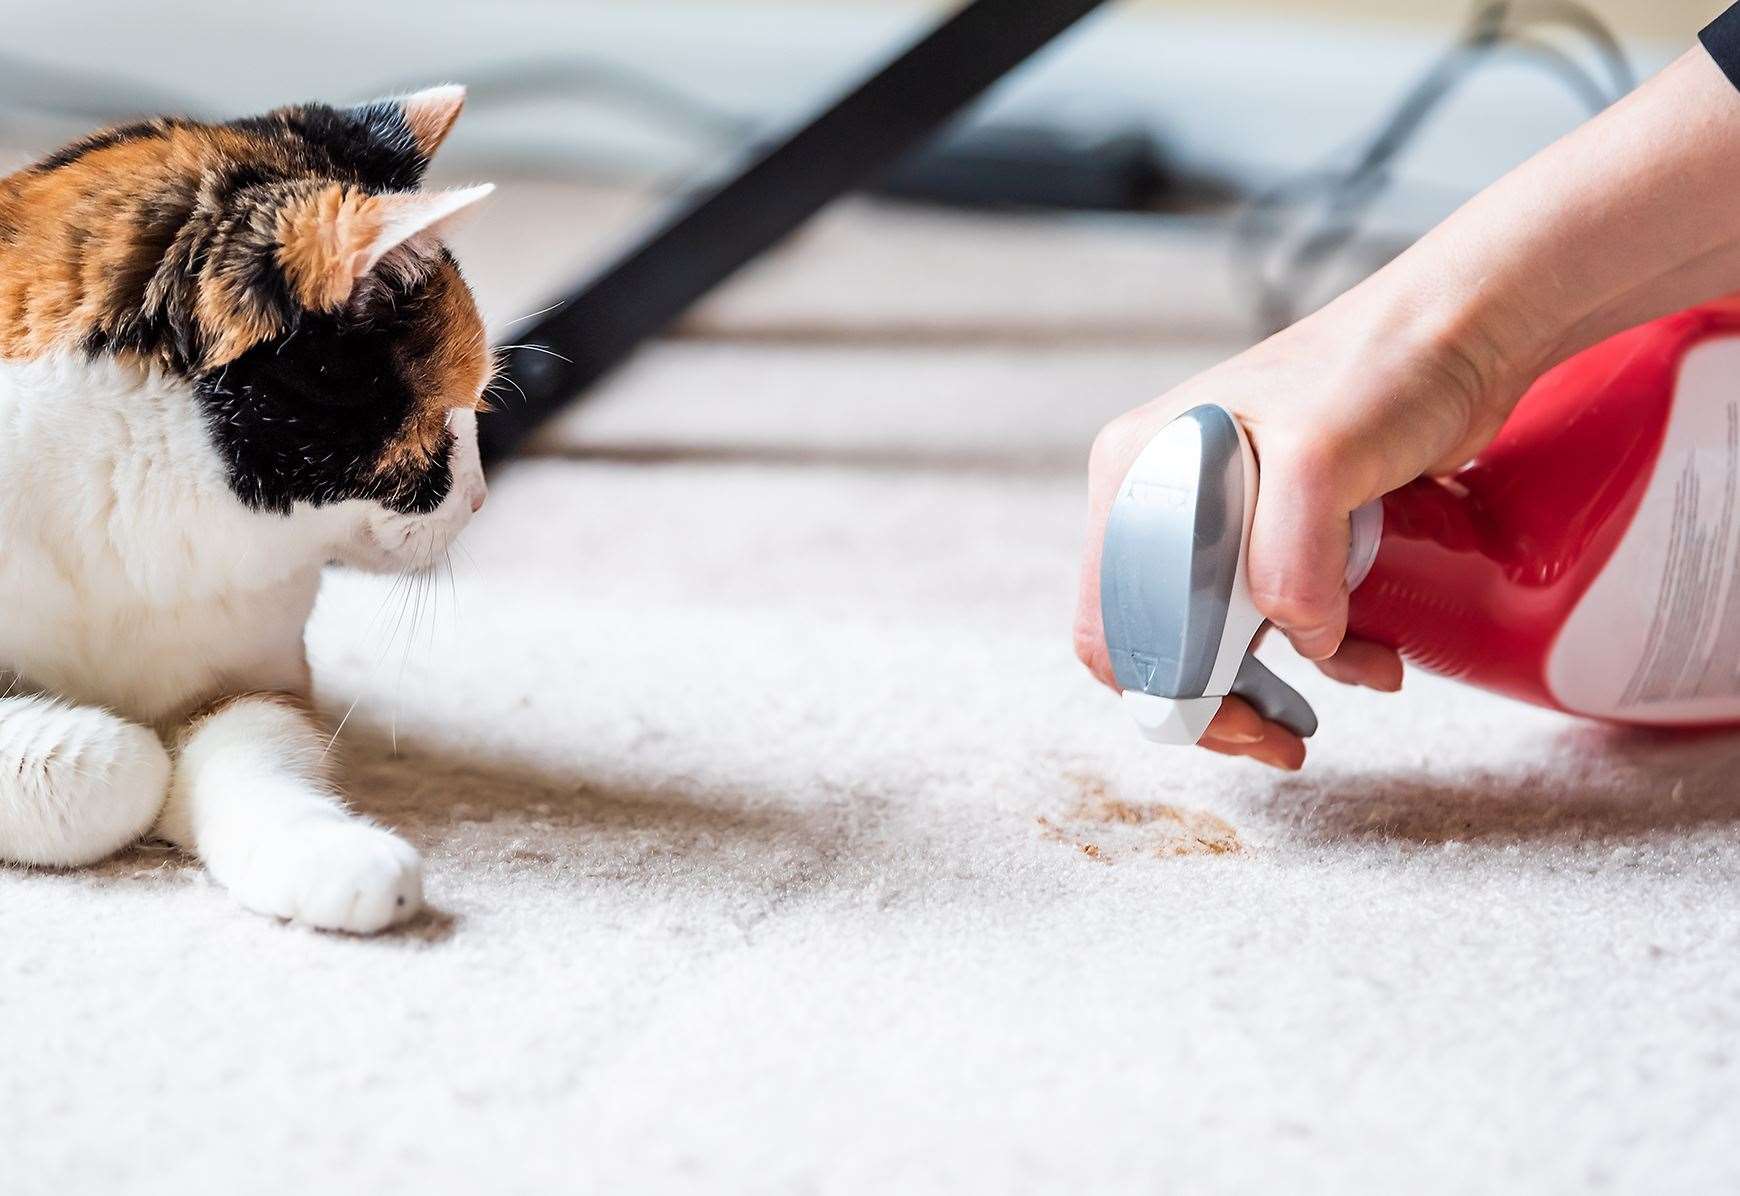 Spraying can be be a sign your cat is unsettled